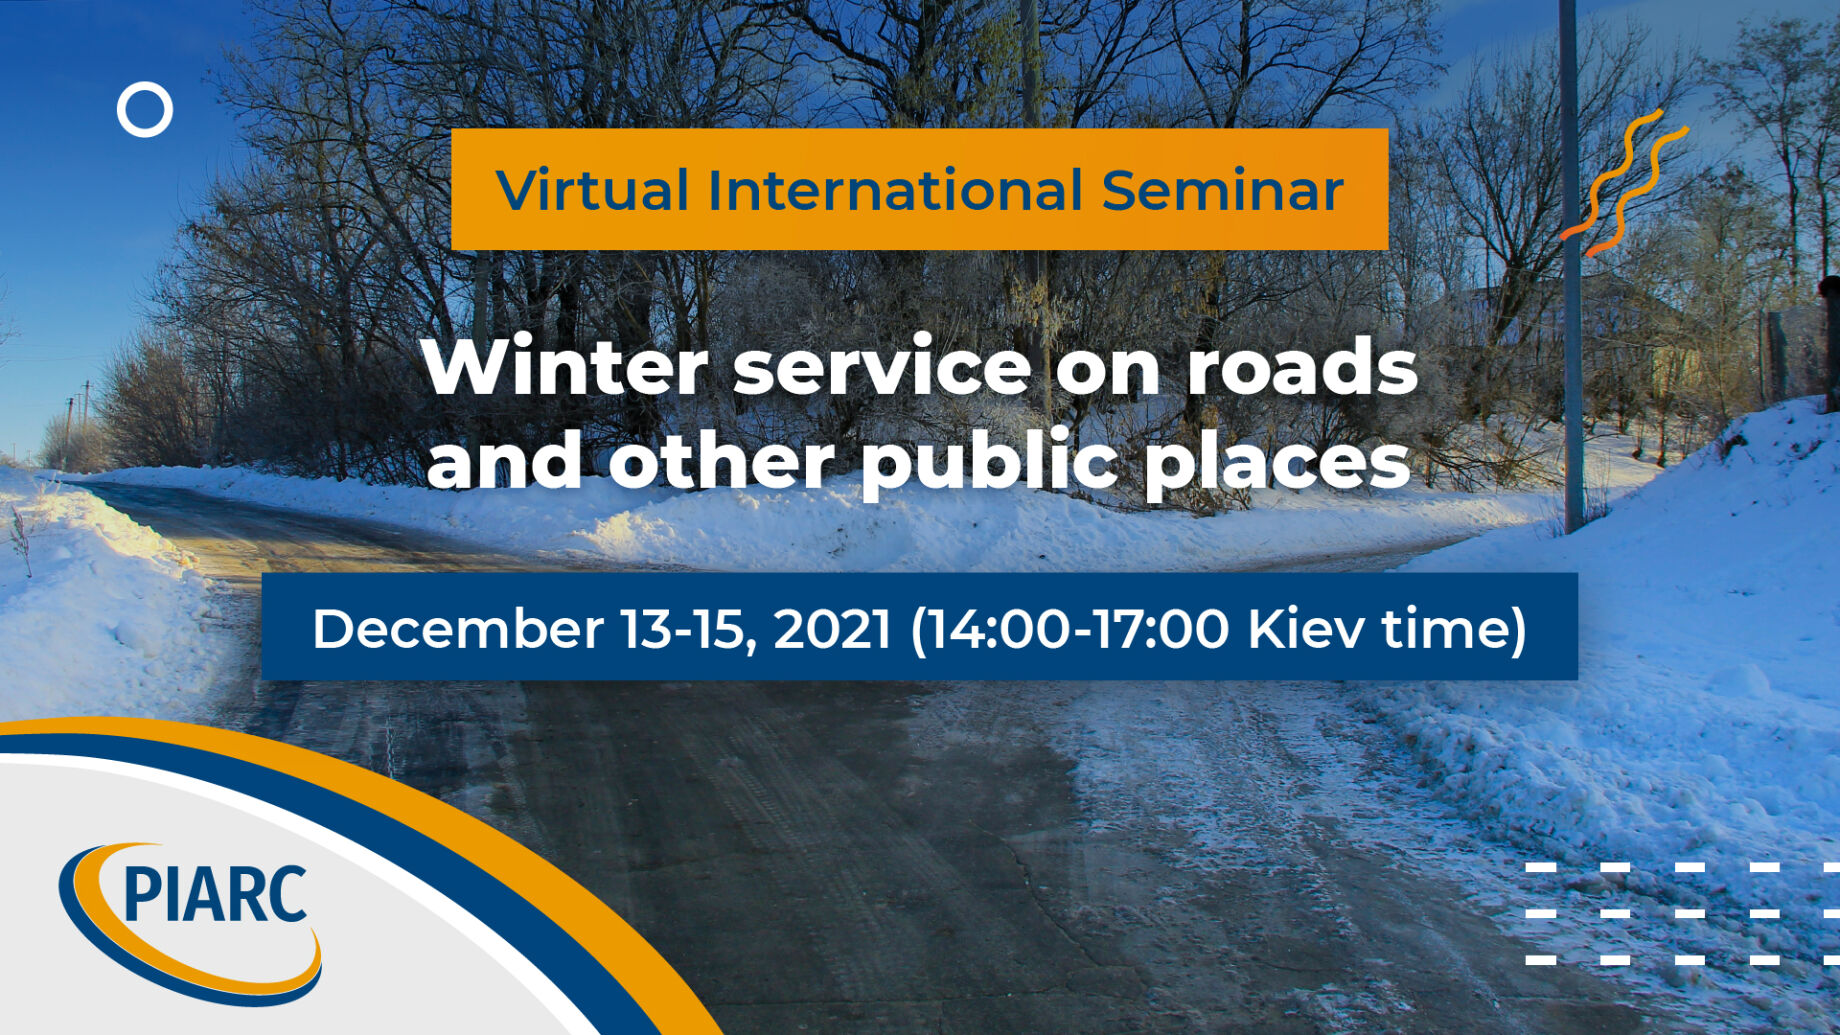 Register now! Find out more about management and improvement
of winter service on roads, join PIARC International Seminar "Winter
service on roads and other public places"